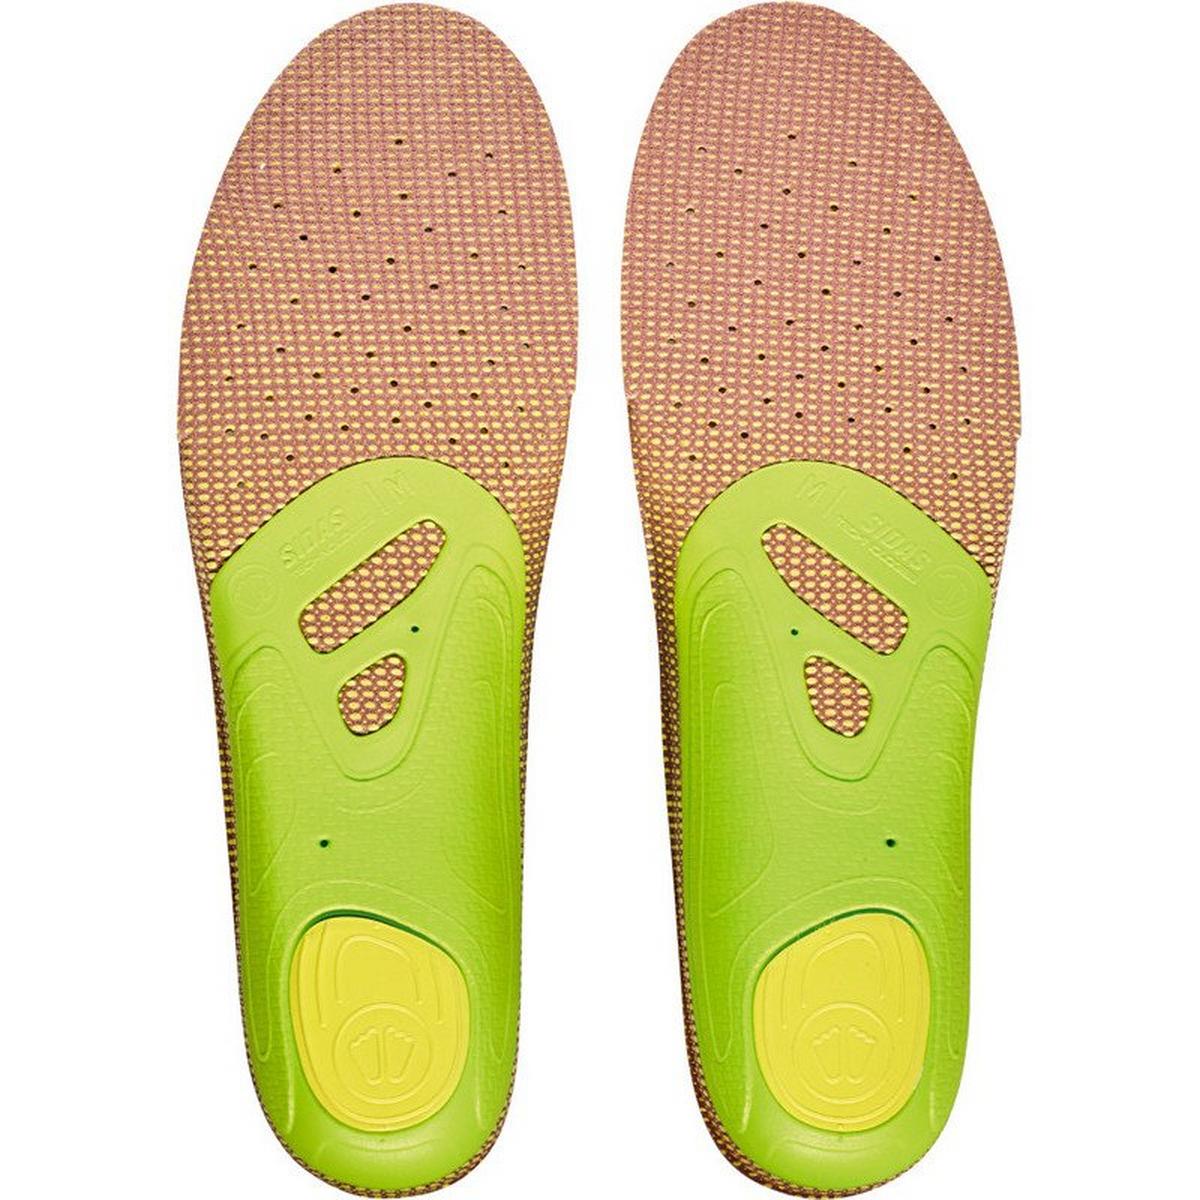 Sidas 3Feet Outdoor Mid Hiking Insoles